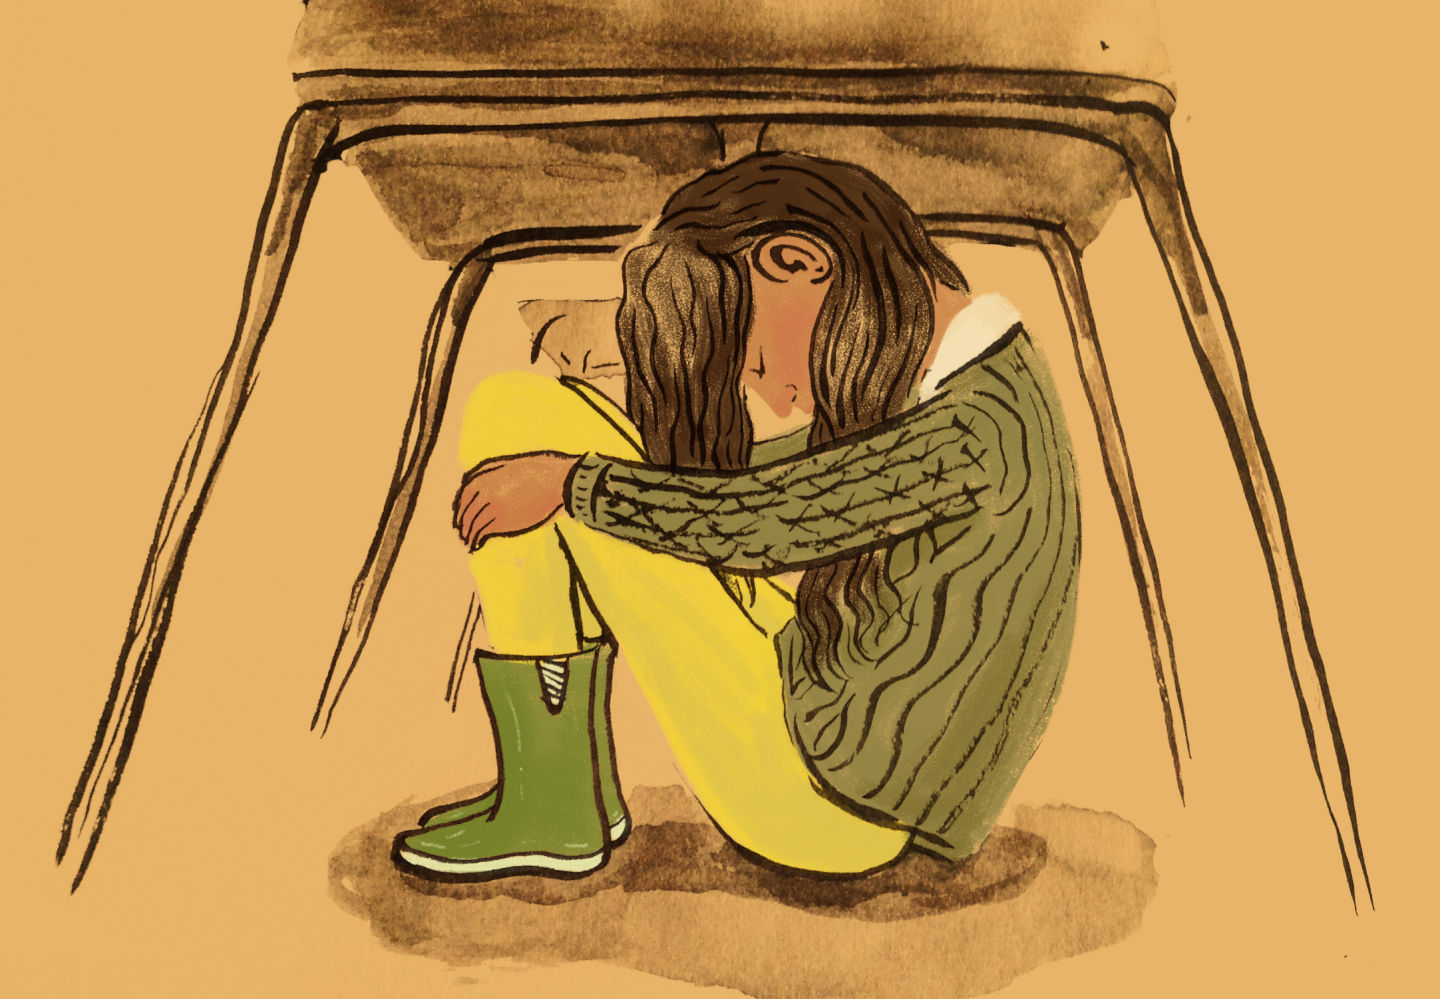 Strategies to Ensure Introverted Students Feel Valued at School